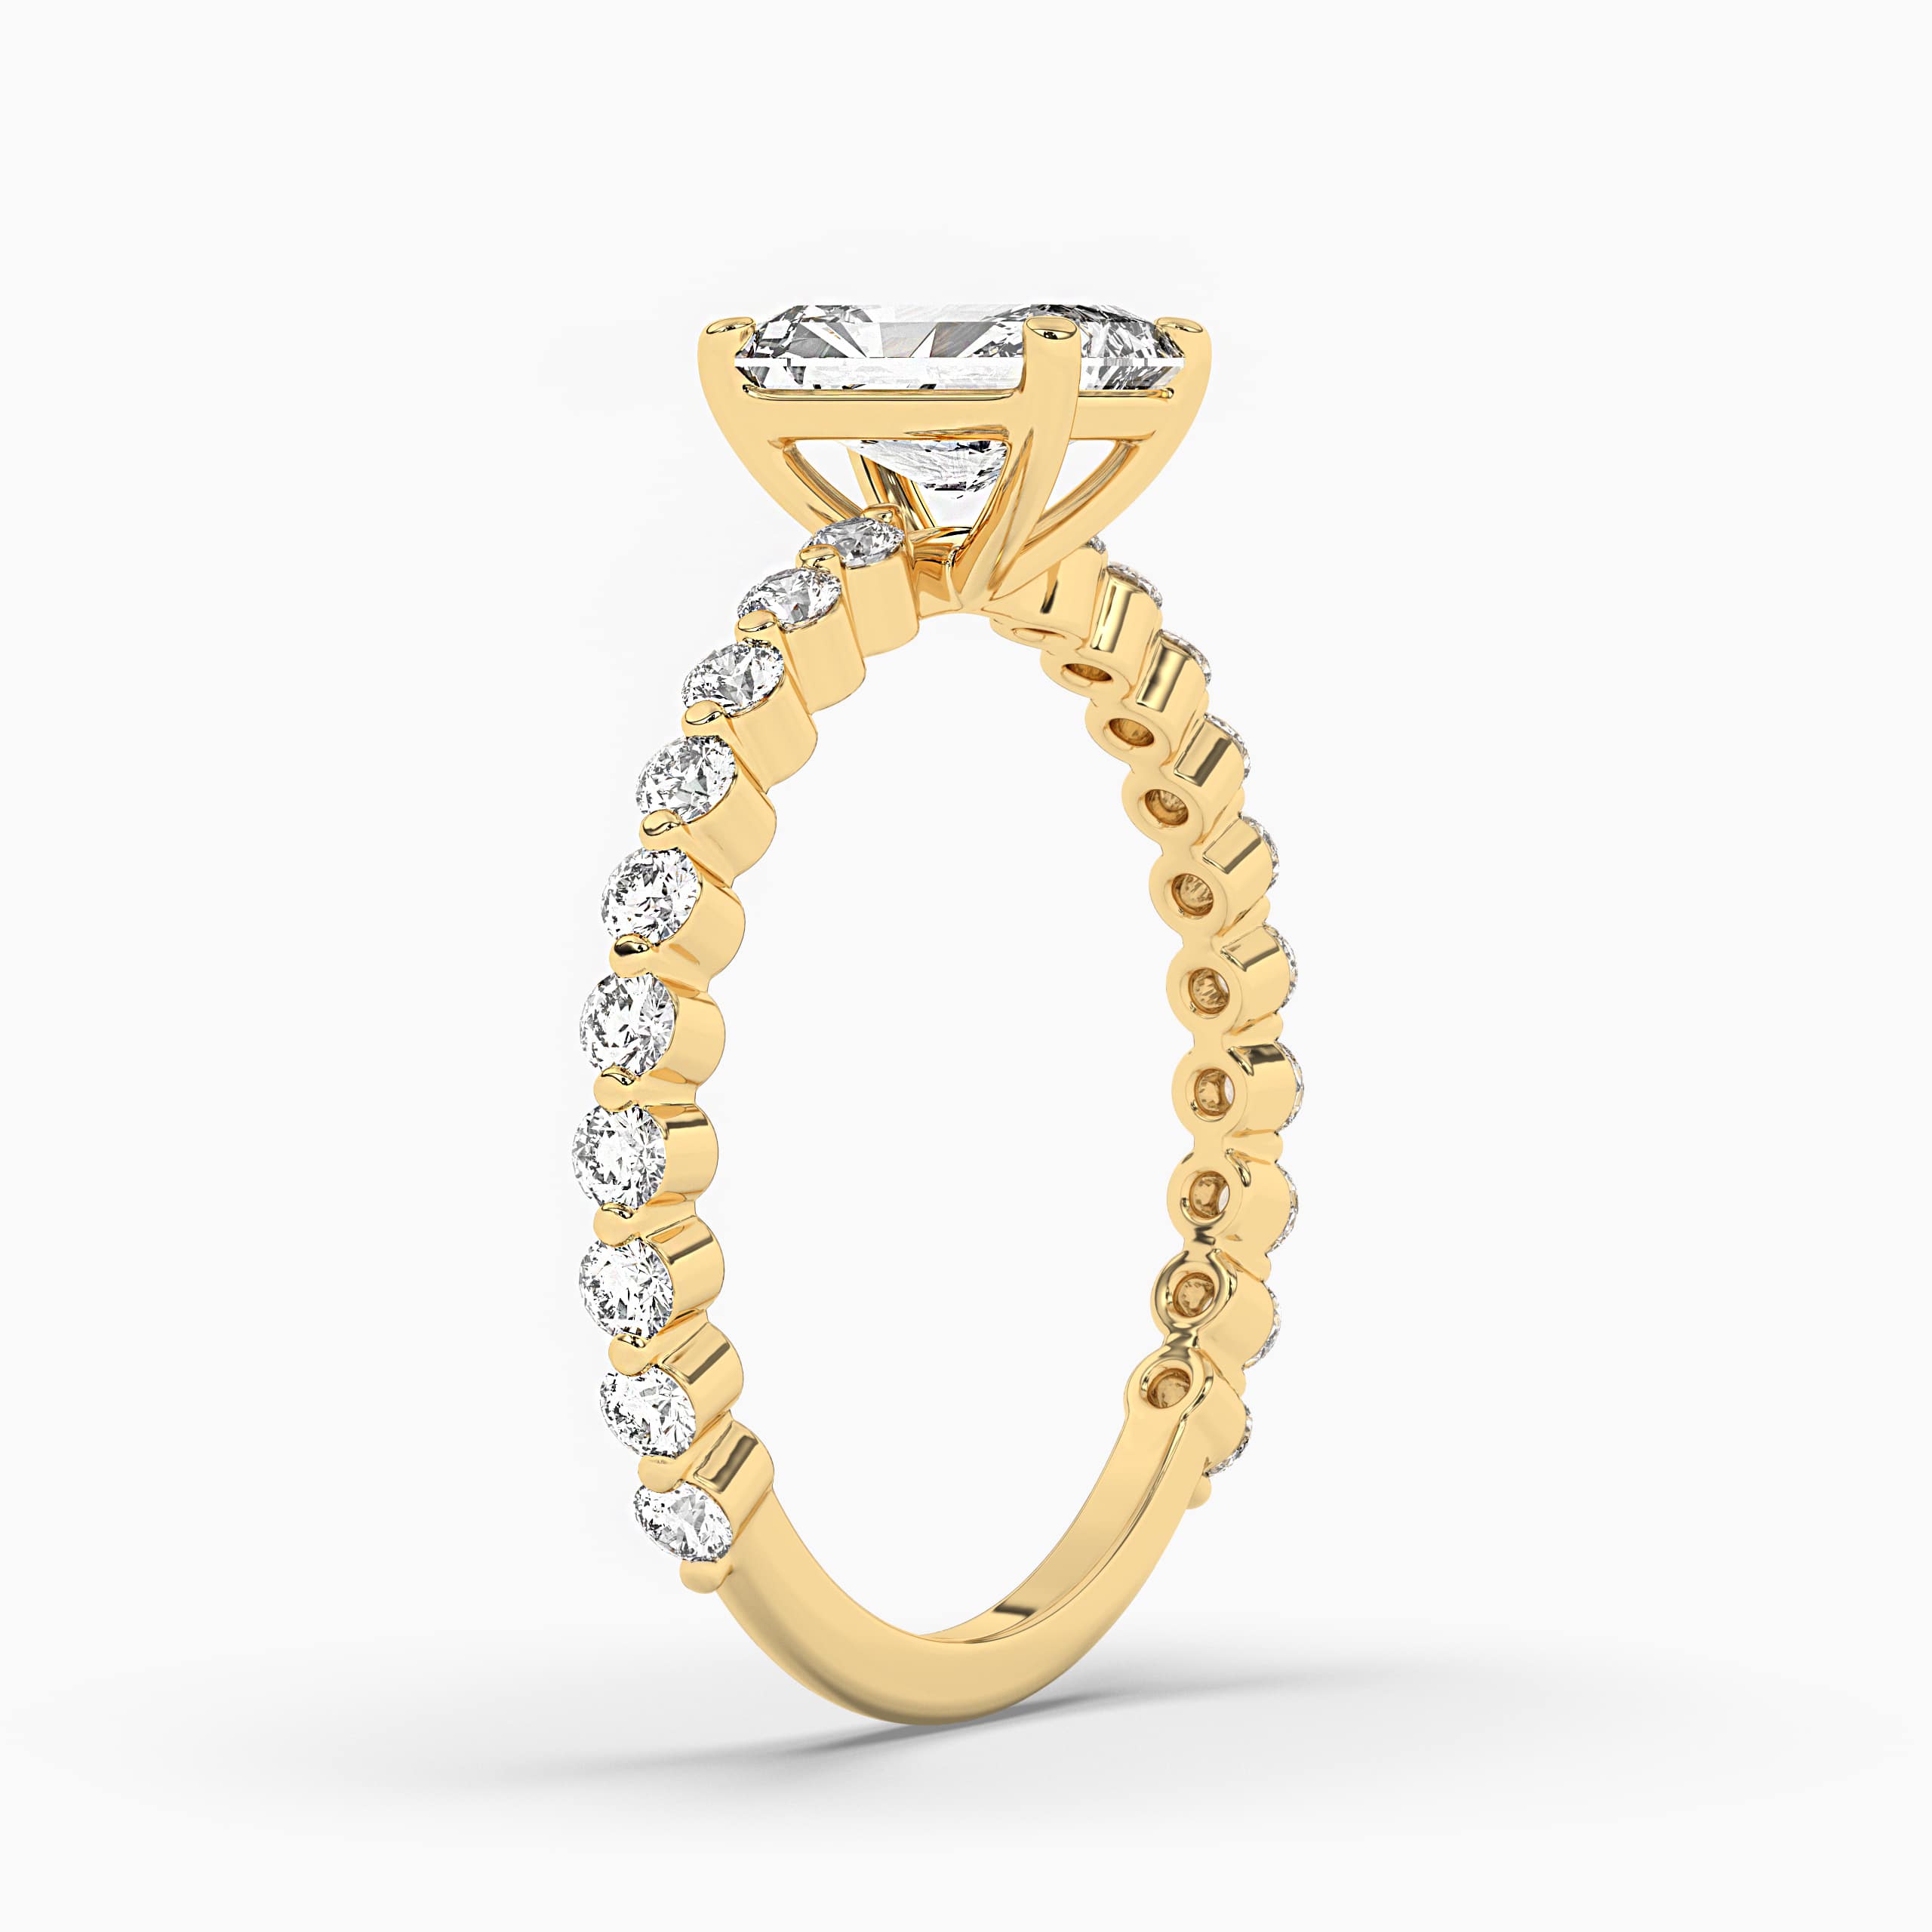  RADIANT CUT DIAMOND ACCENTED ENGAGEMENT RING SETTING YELLOW GOLD